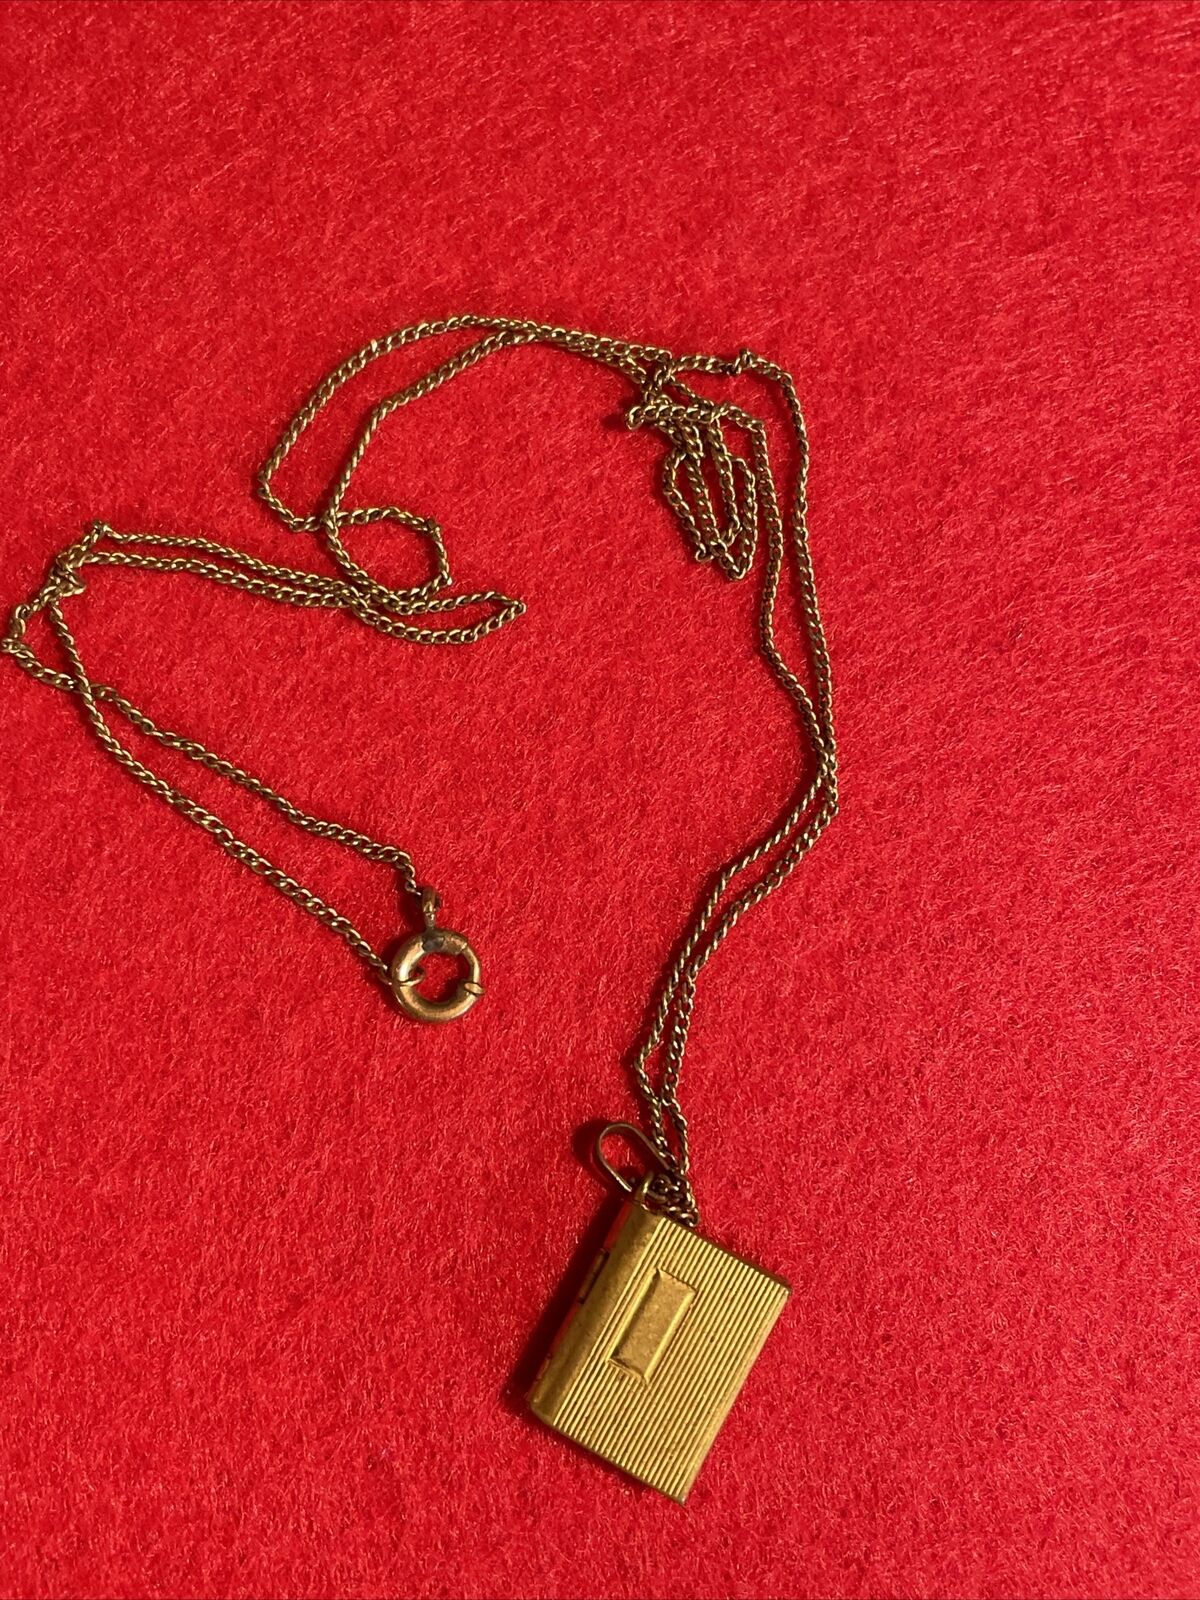 Vintage Tiny BIBLE LOCKET with Necklace THE LORDS PRAYER Goldtone 18”